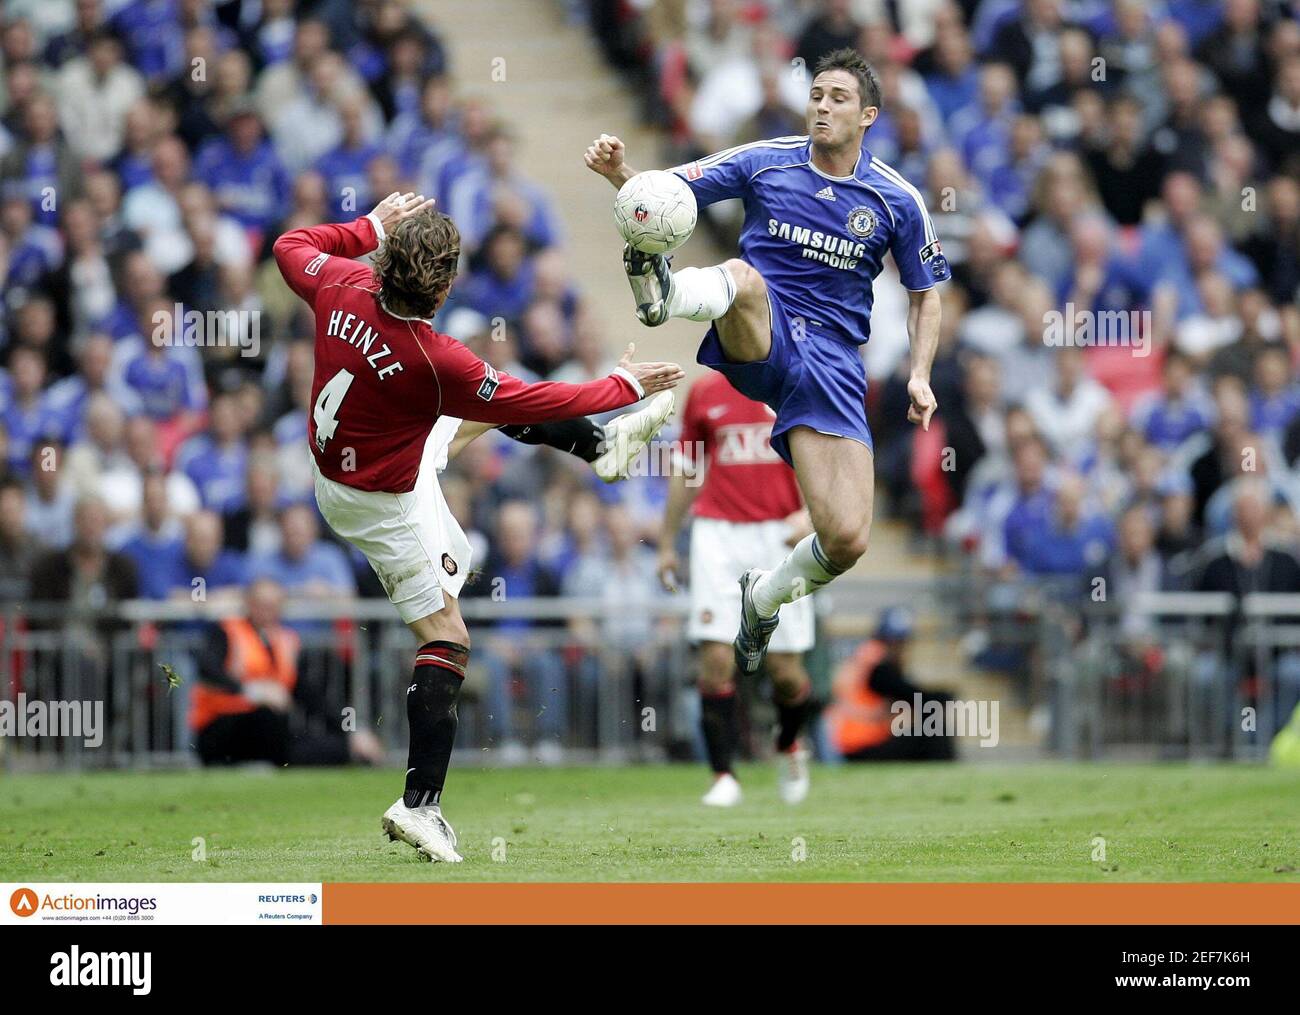 Football - Chelsea v Manchester United FA Cup Final - Wembley Stadium -  19/5/07 Gabriel Heinze - Manchester United in action against Frank Lampard  - Chelsea Mandatory Credit: Action Images / John Sibley Livepic Stock Photo  - Alamy